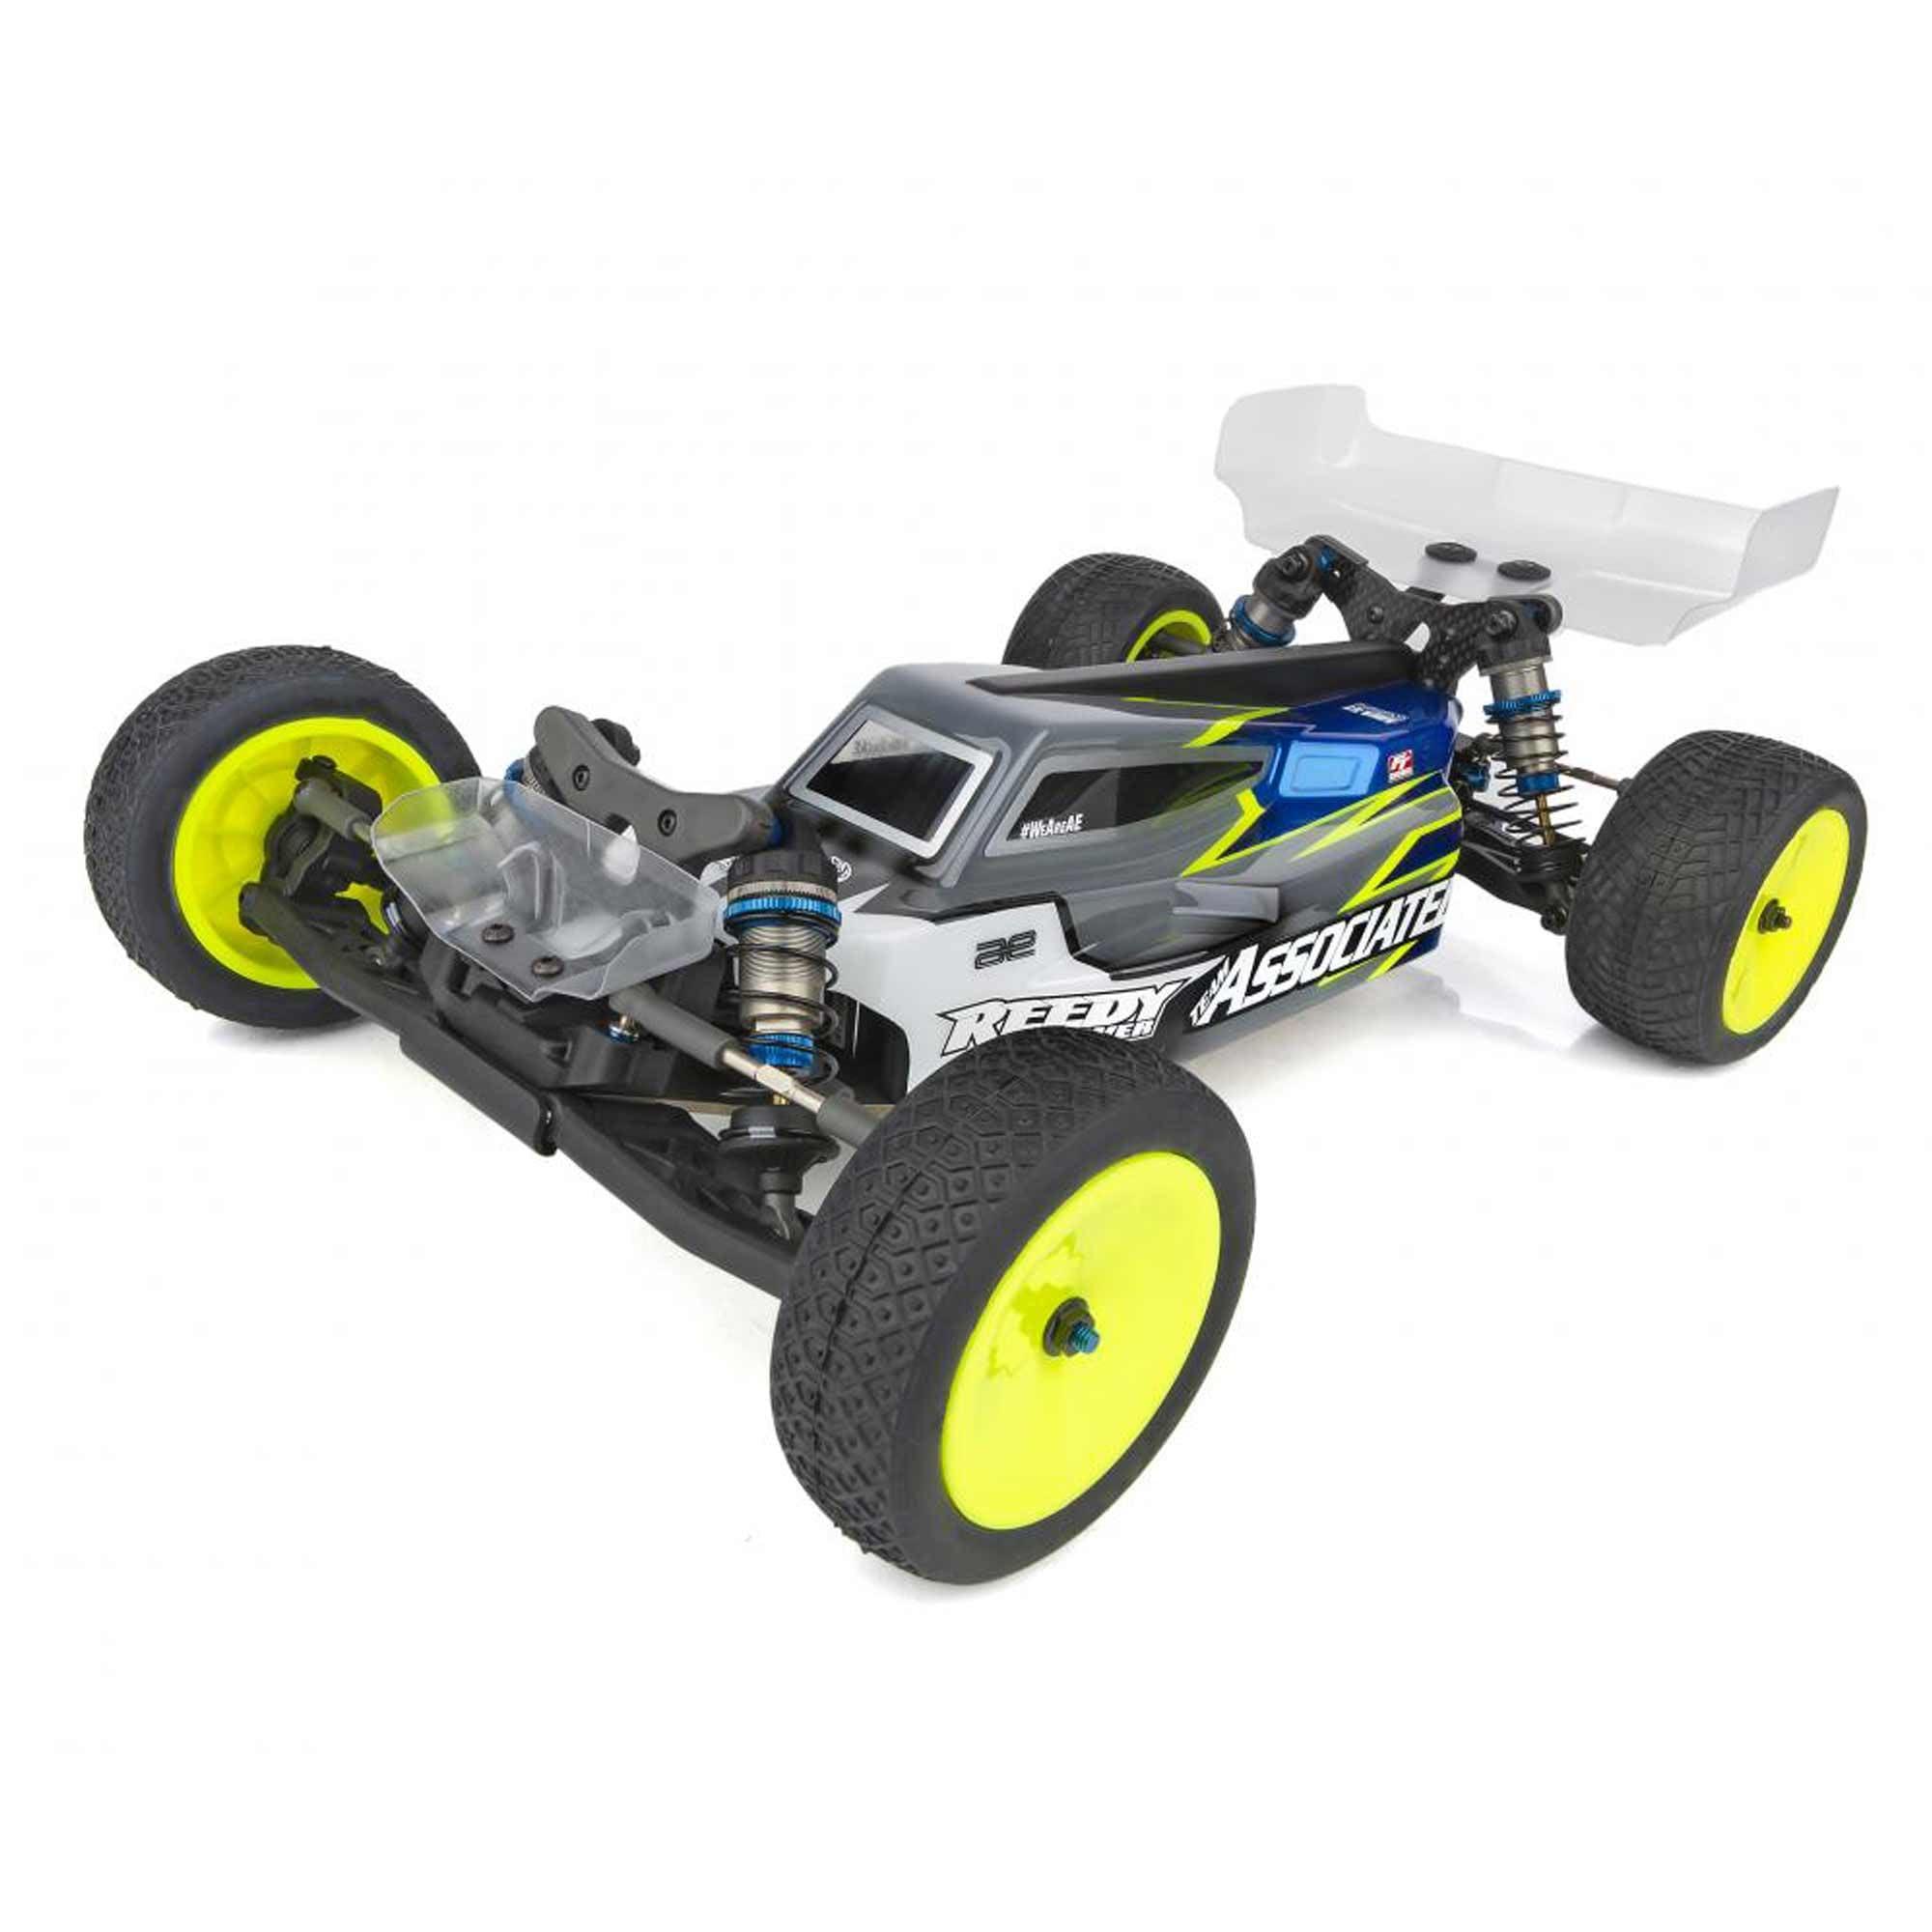 Team Associated Rc10: Enhance Your RC10 with Team Associated Upgrades 